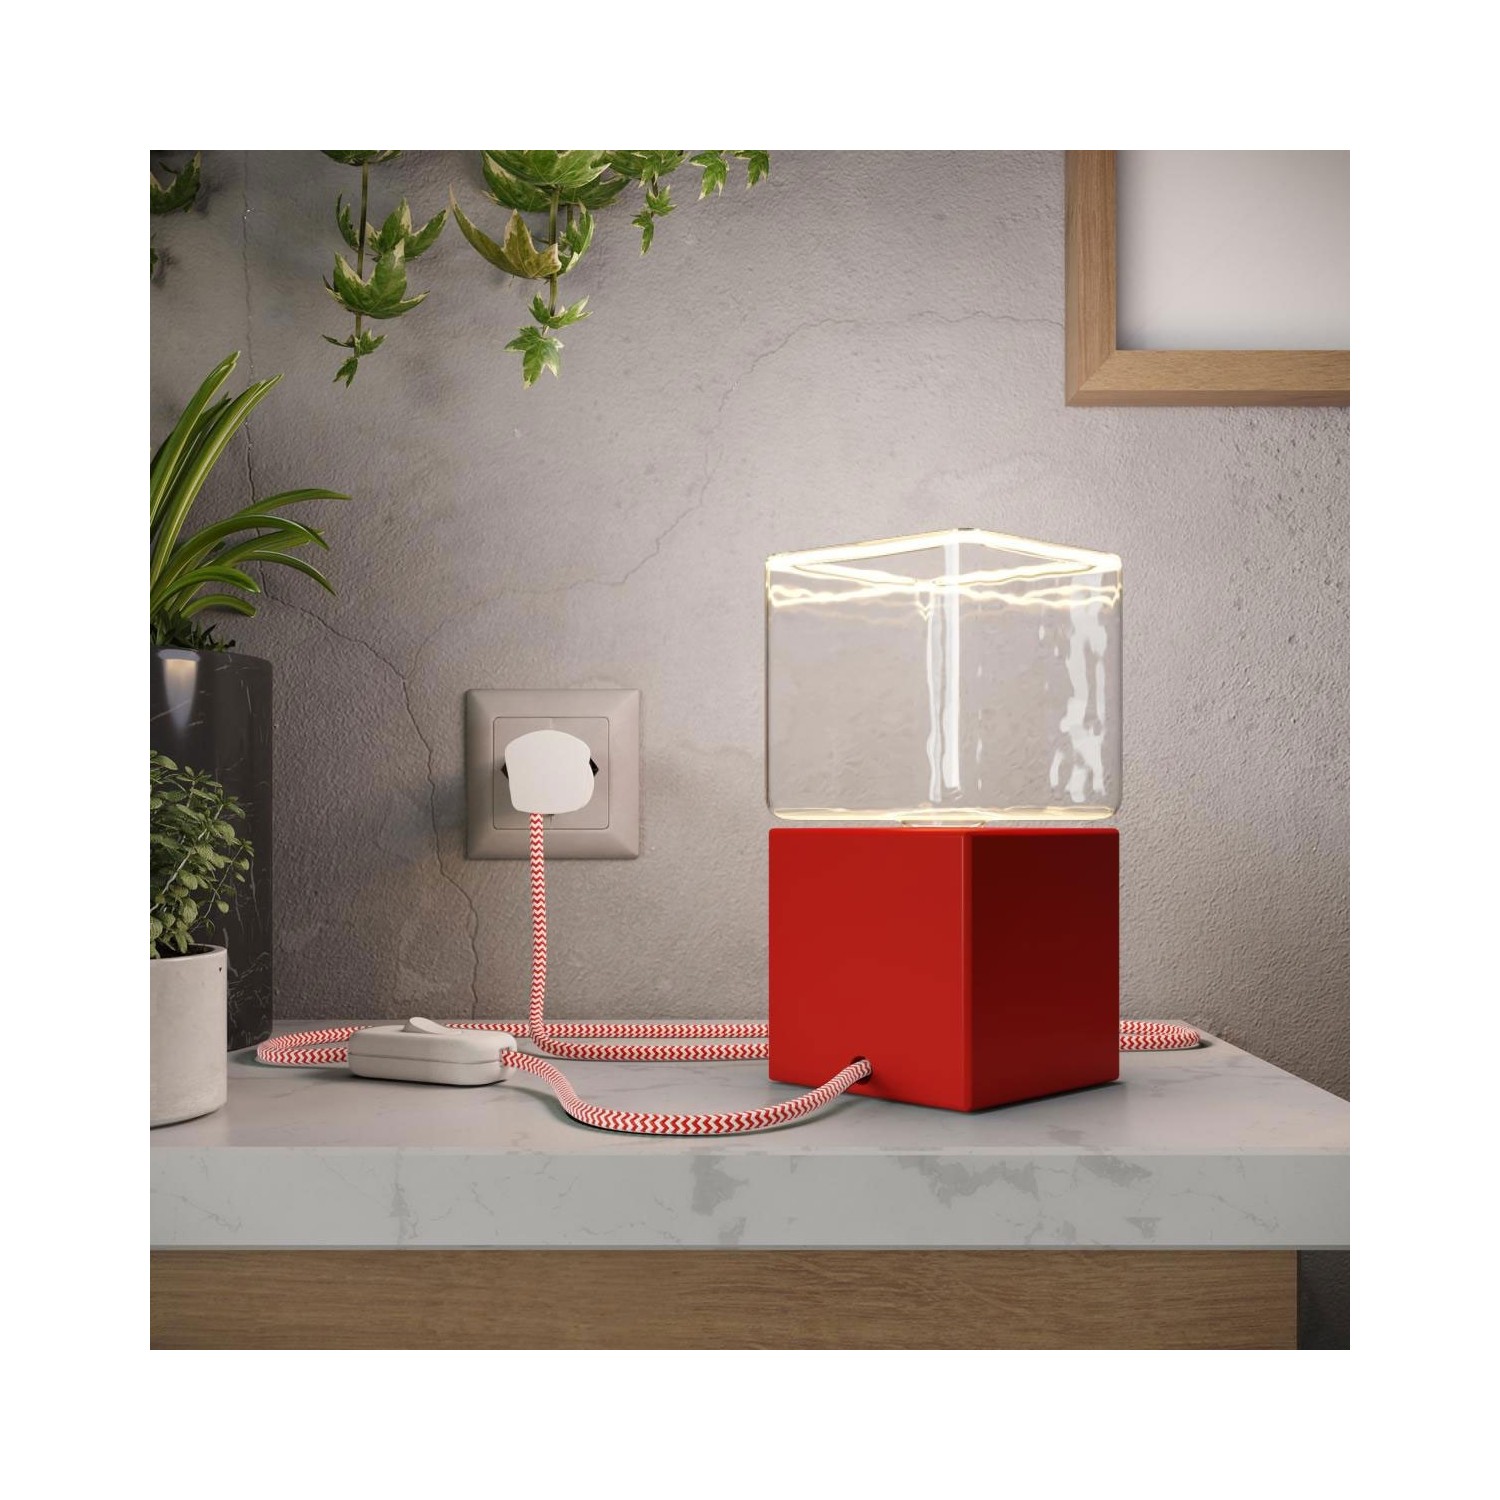 Posaluce Cubetto Color, painted wooden table lamp complete with textile cable, switch and UK plug